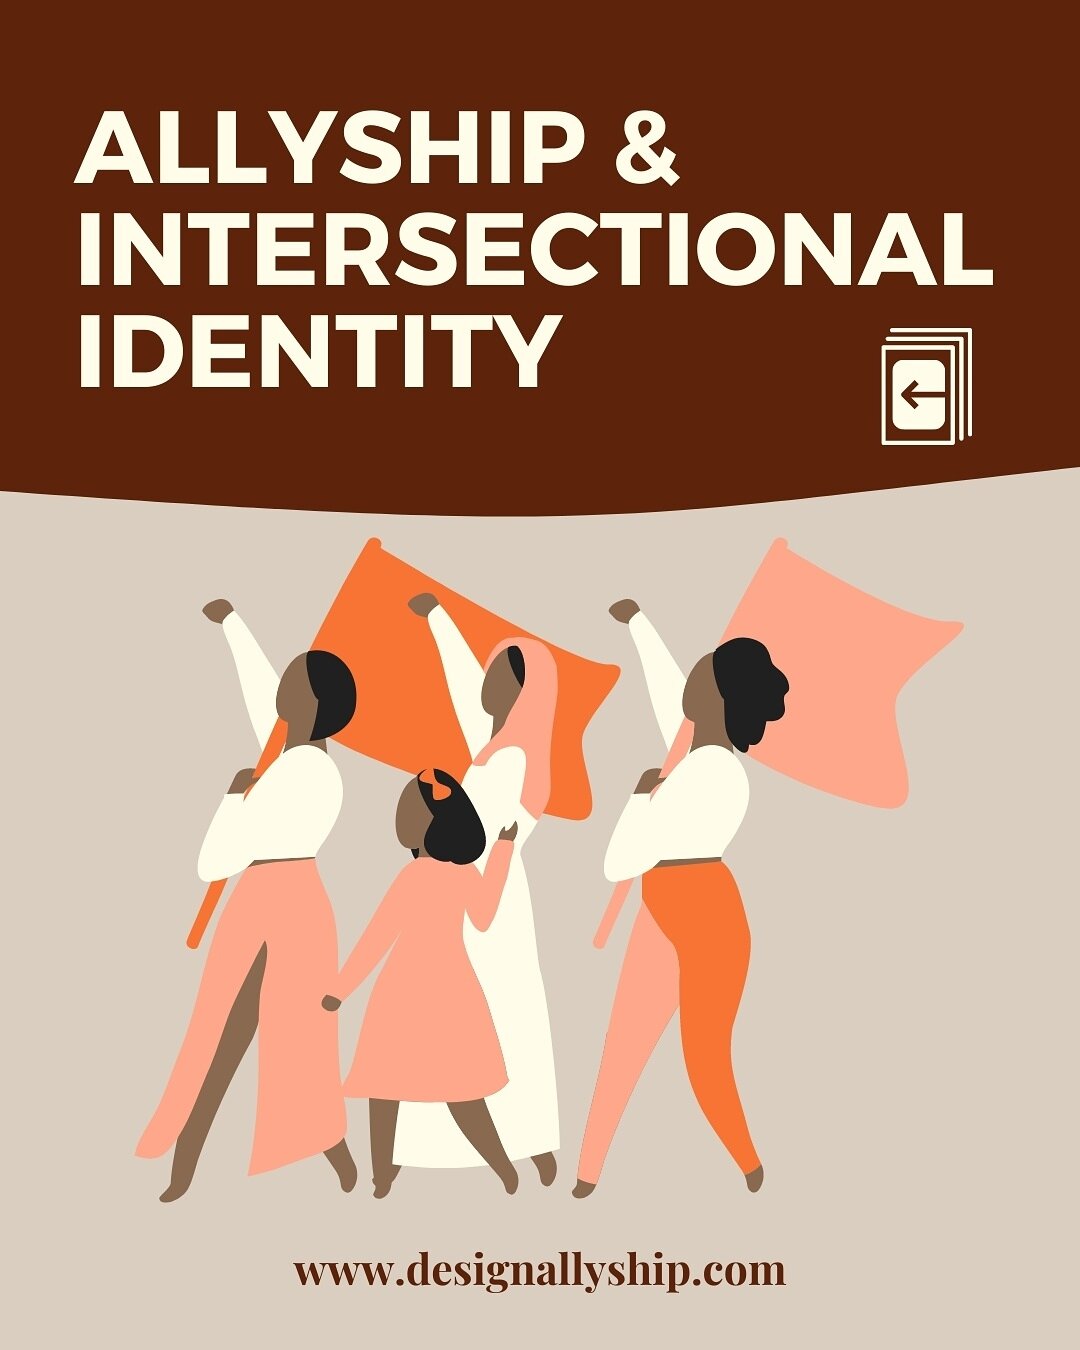 An understanding of intersectional identities is a great foundation for allyship. Become a better ally and supporter for your colleagues by understanding how social identities impact our lived experiences - learn more about supporting marginalized de